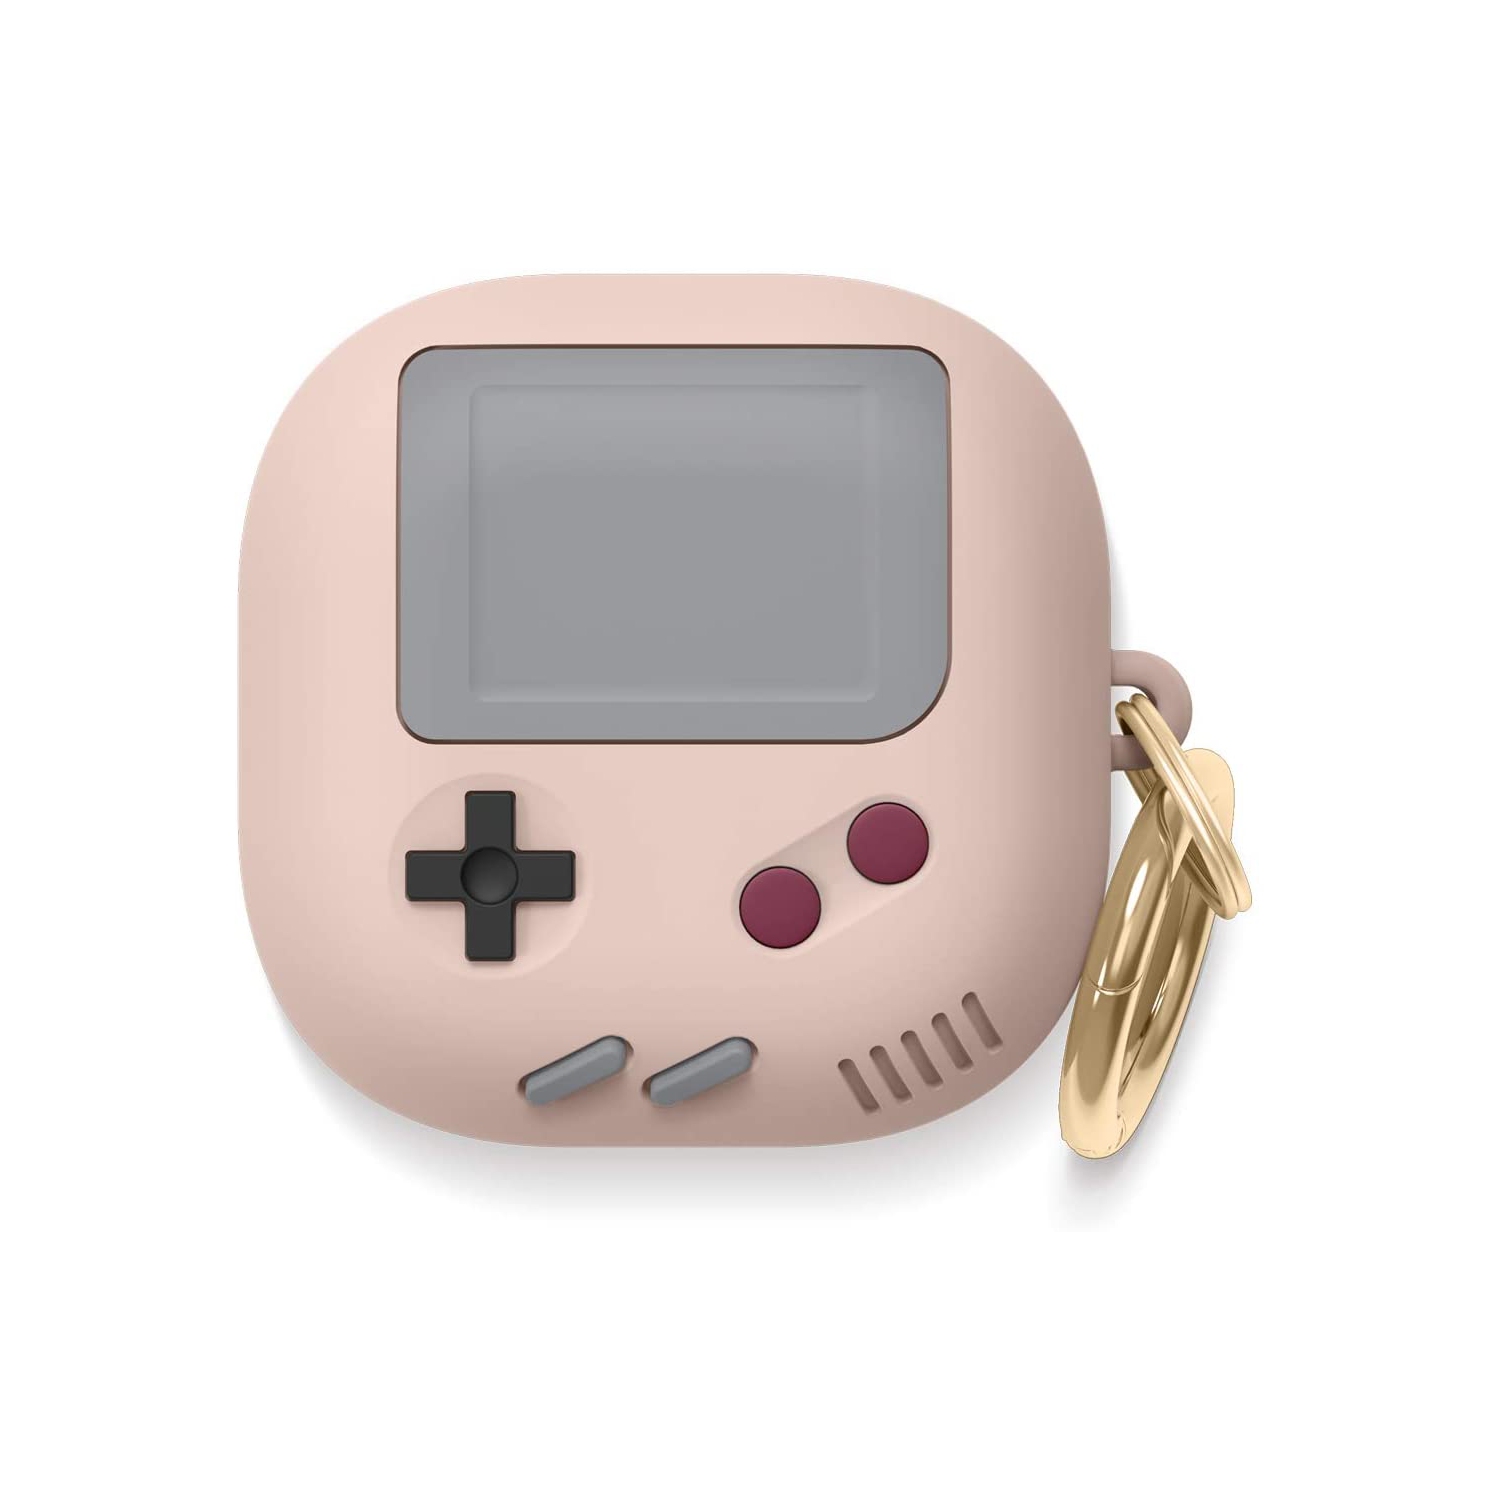 elago GB5 Case Compatible with Samsung Galaxy Buds Pro Case (2021) / Compatible with Samsung Galaxy Buds Live Case (2020), Classic Handheld Game Console Design [Sand Pink] [US Patent Registered]